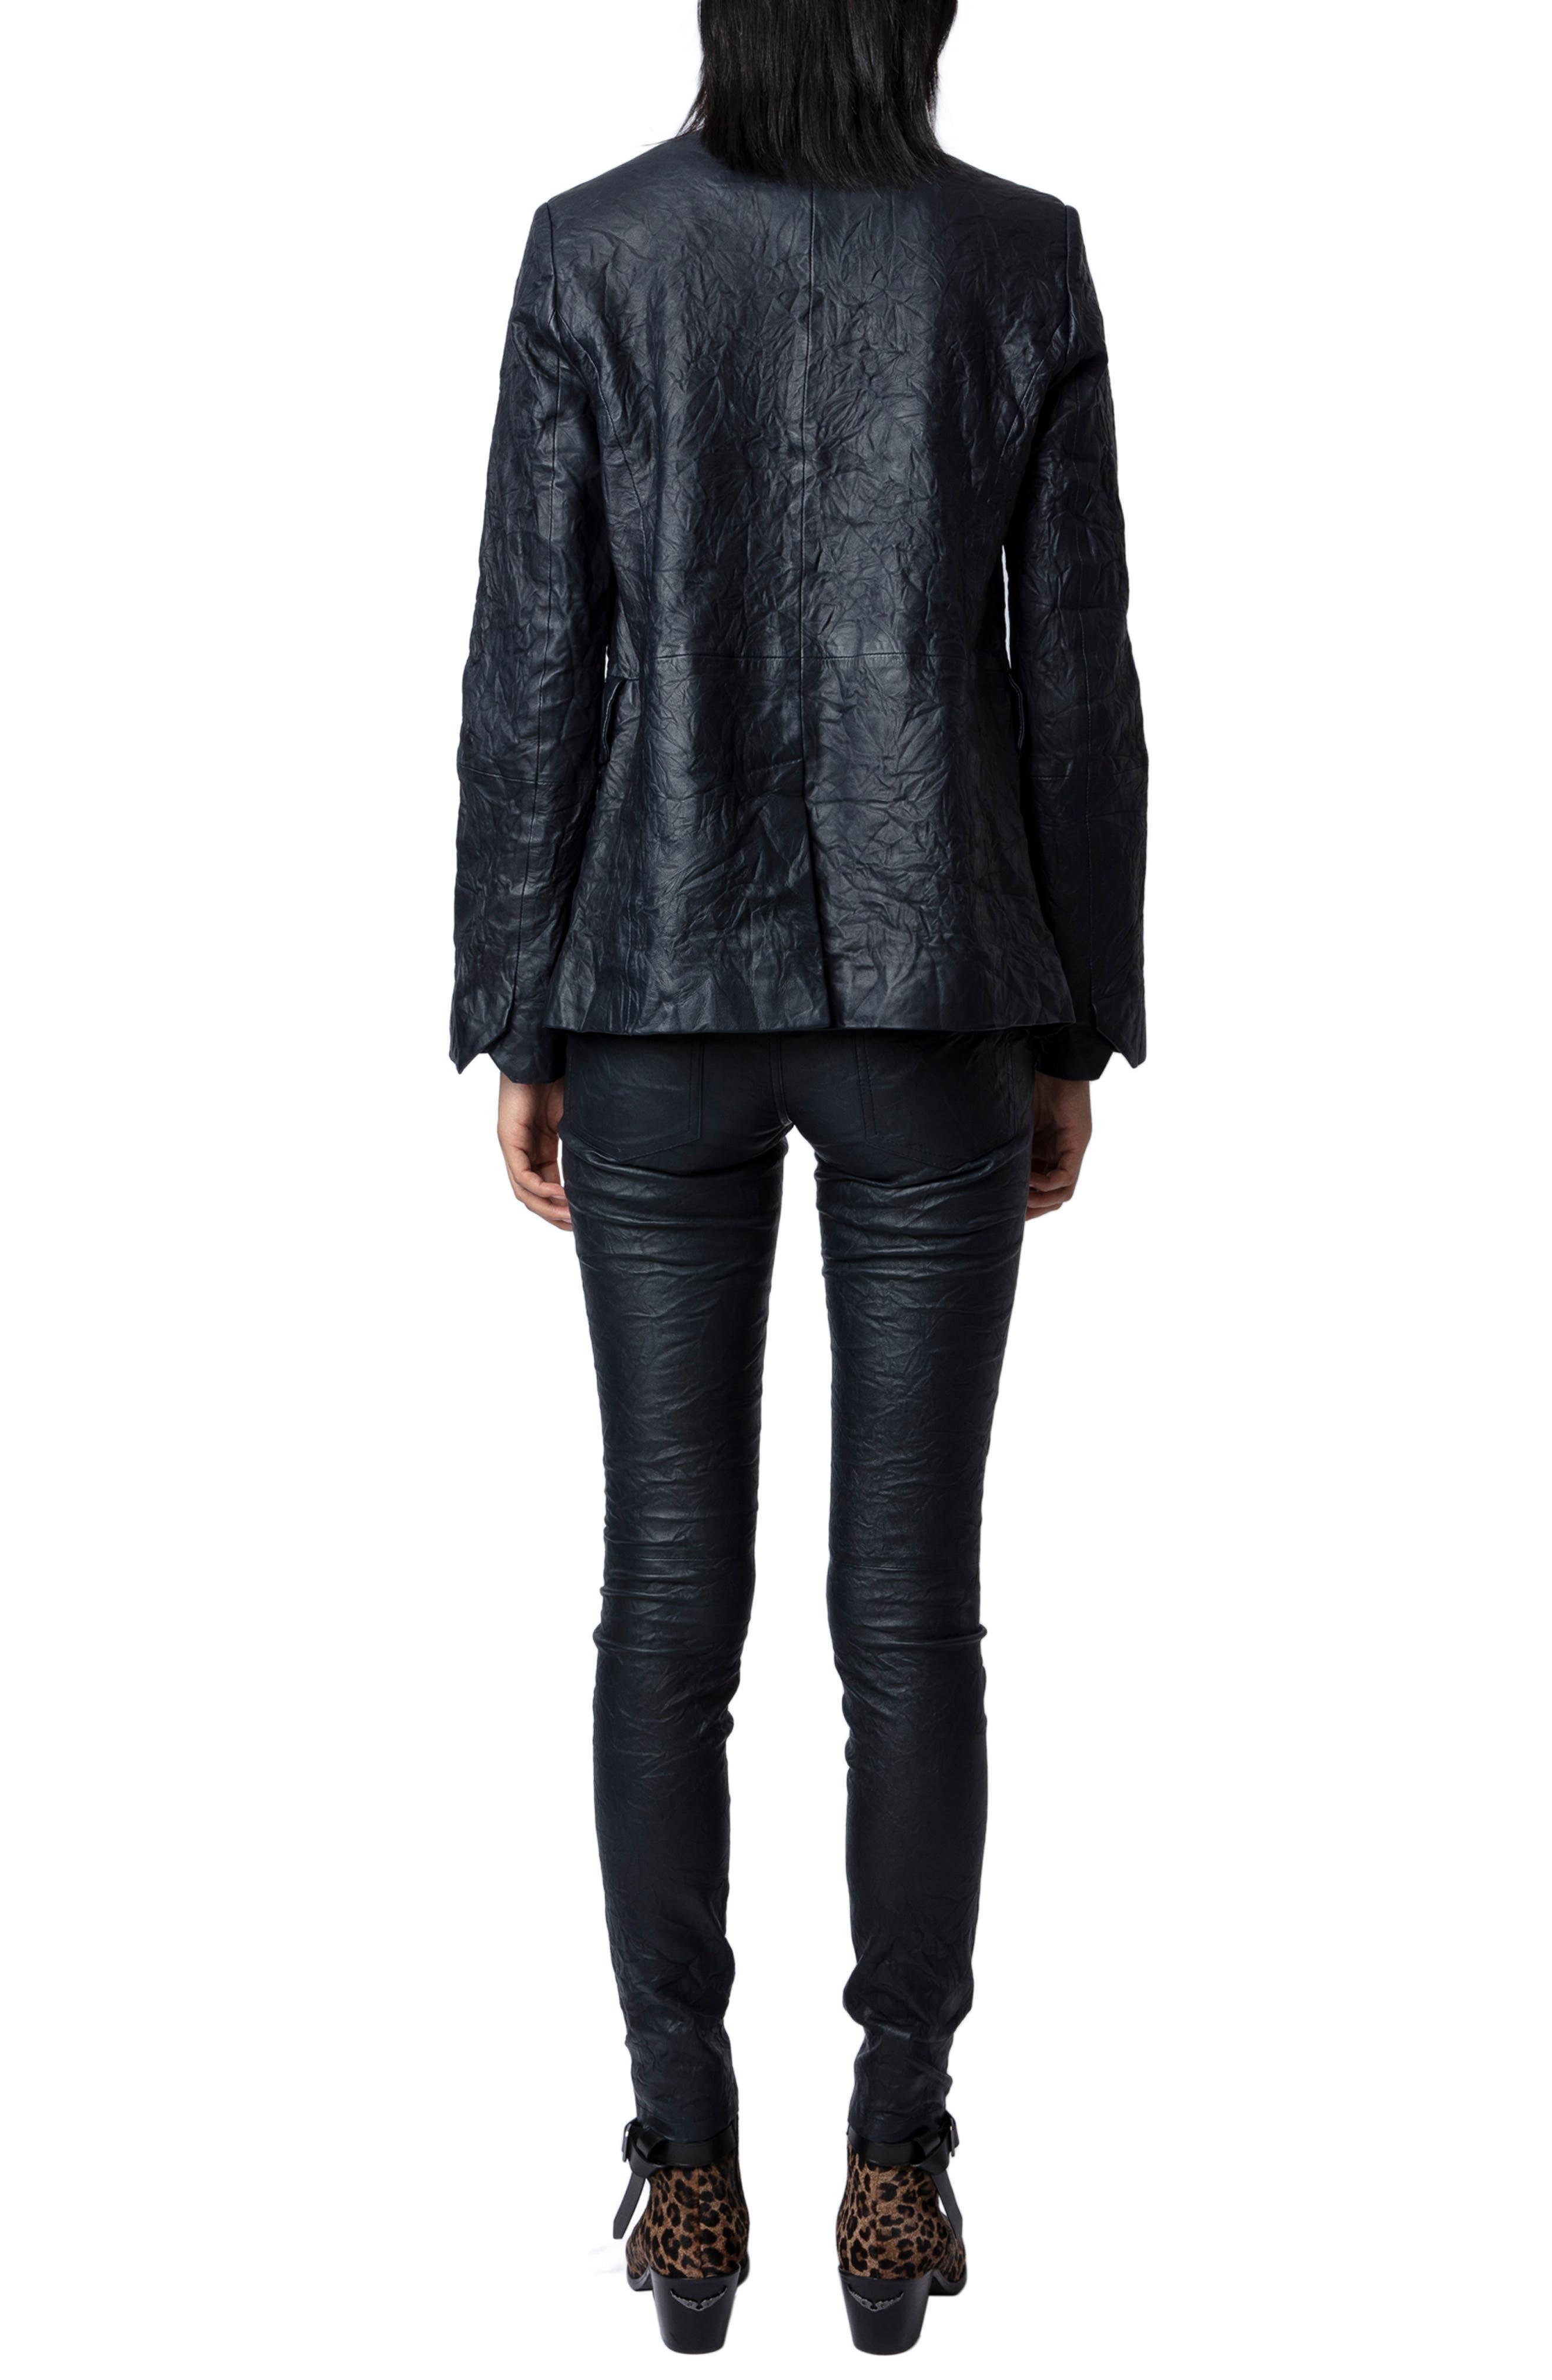 Zadig & Voltaire Very Crushed Leather Jacket in Black | Lyst